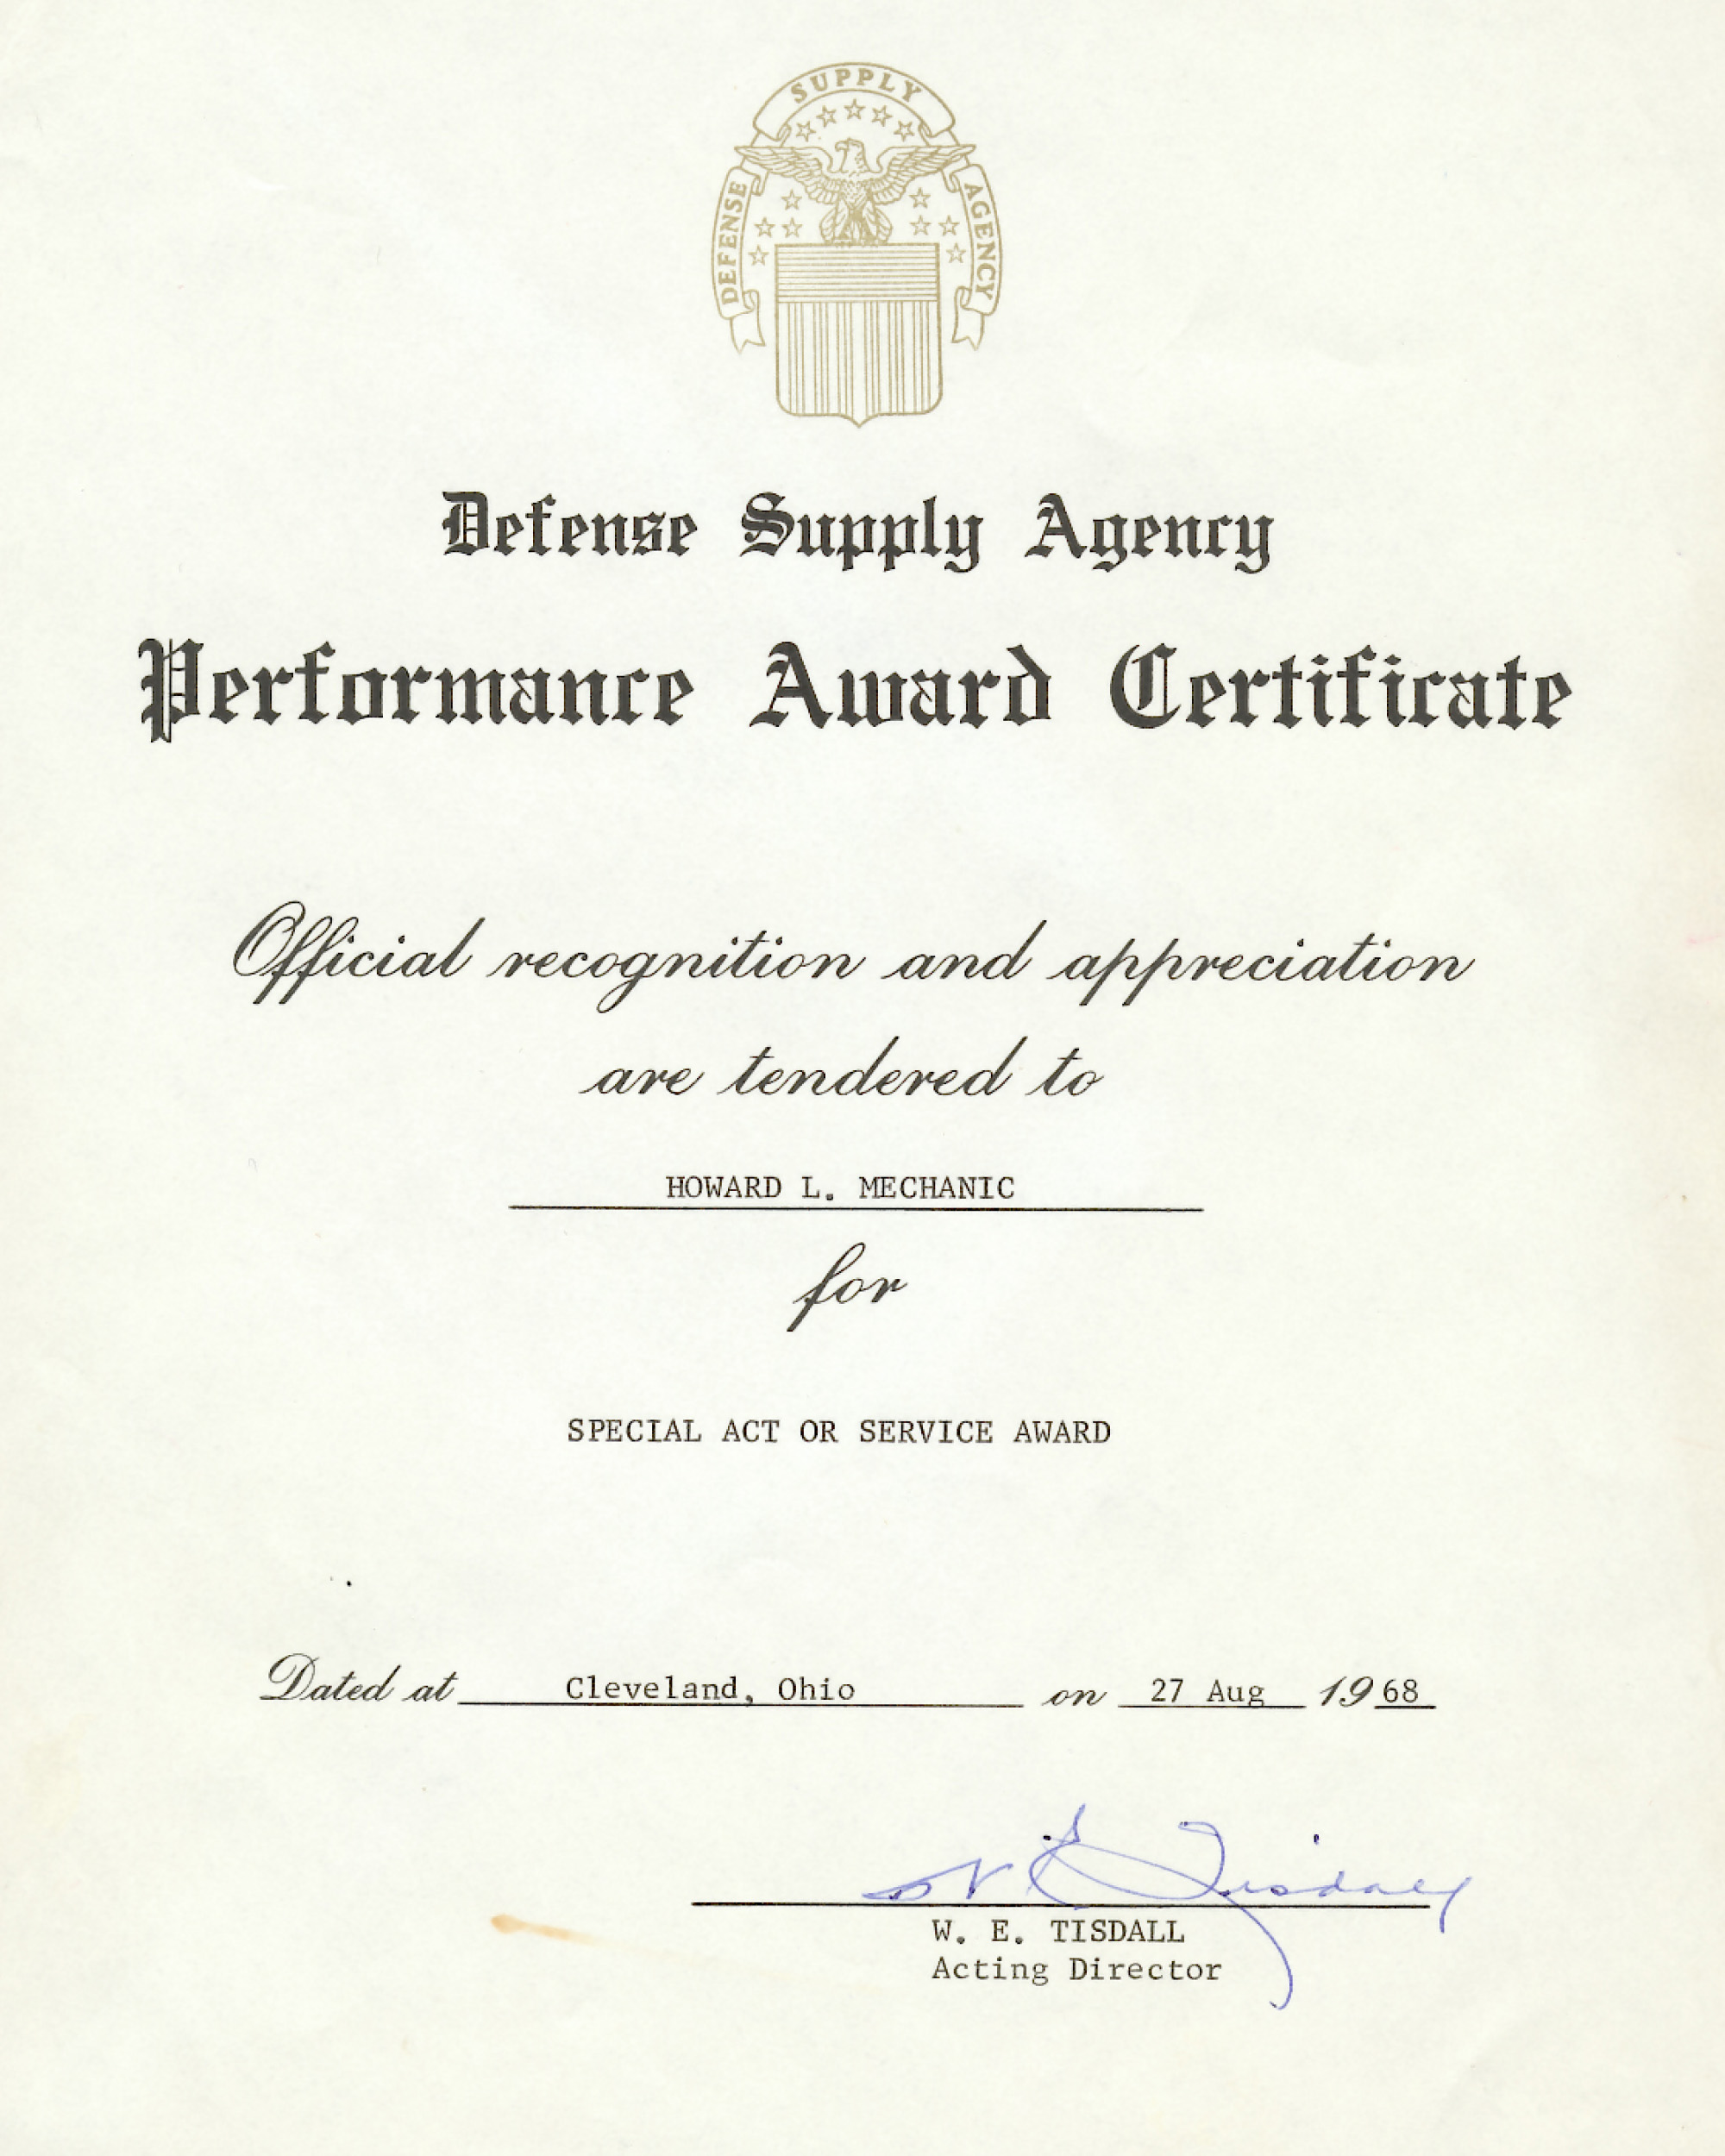 The performance award given to Howard during his tenure at the Defense Supply Agency. Image courtesy of Howard Mechanic.